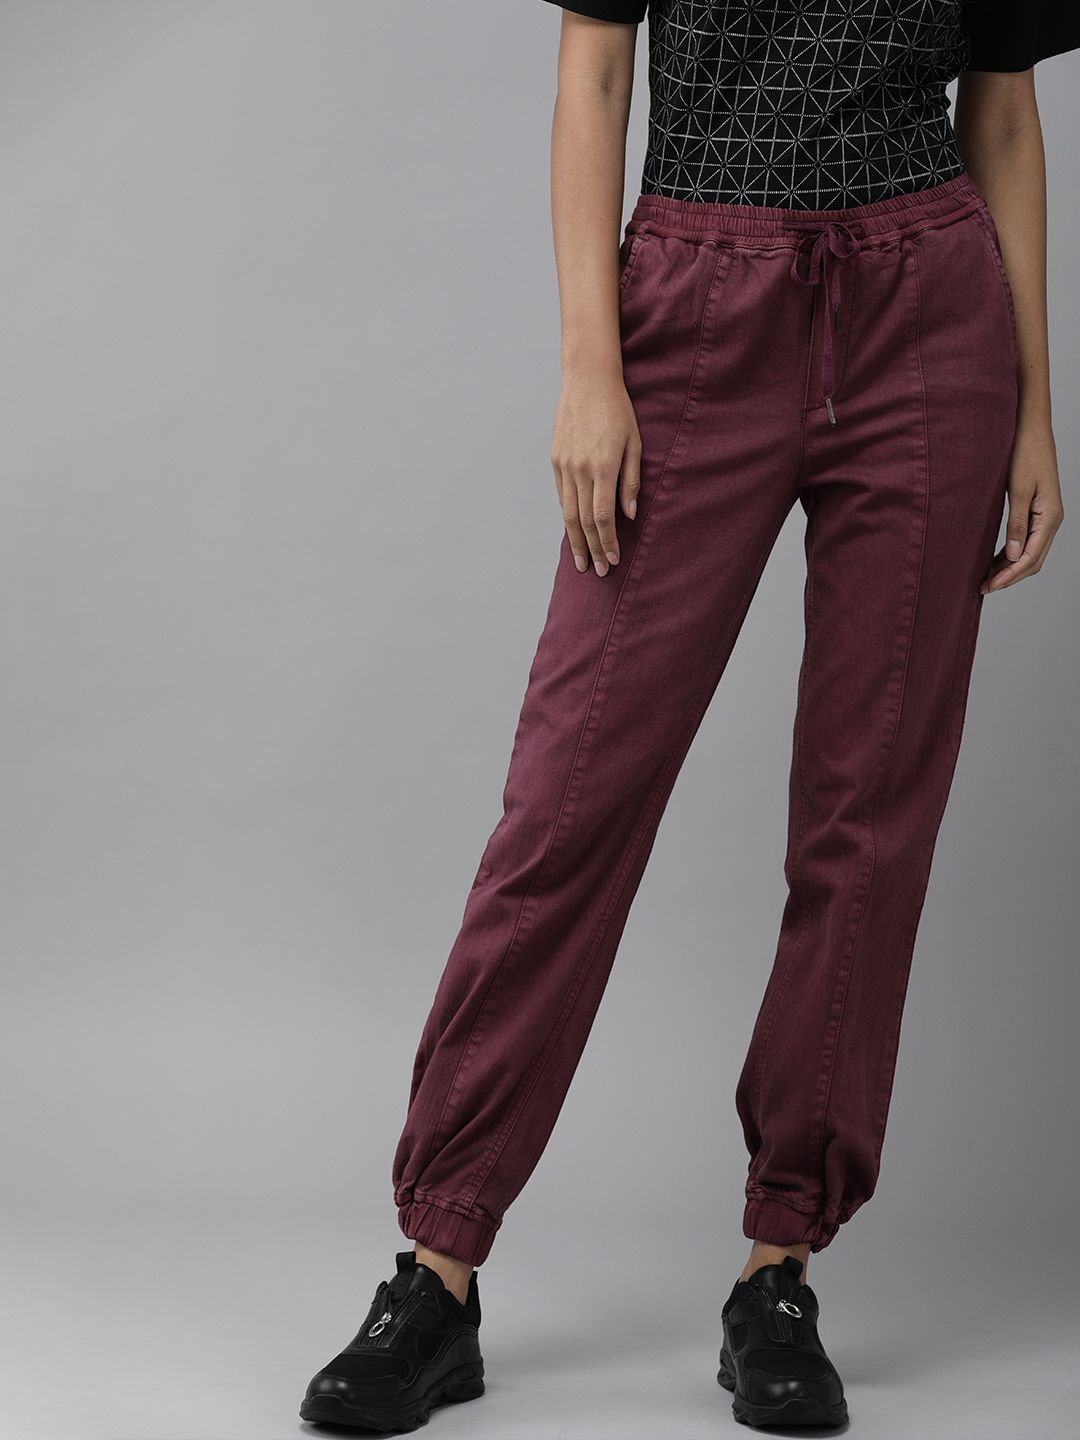 The Roadster Lifestyle Co Women Burgundy Joggers Trousers Price in India